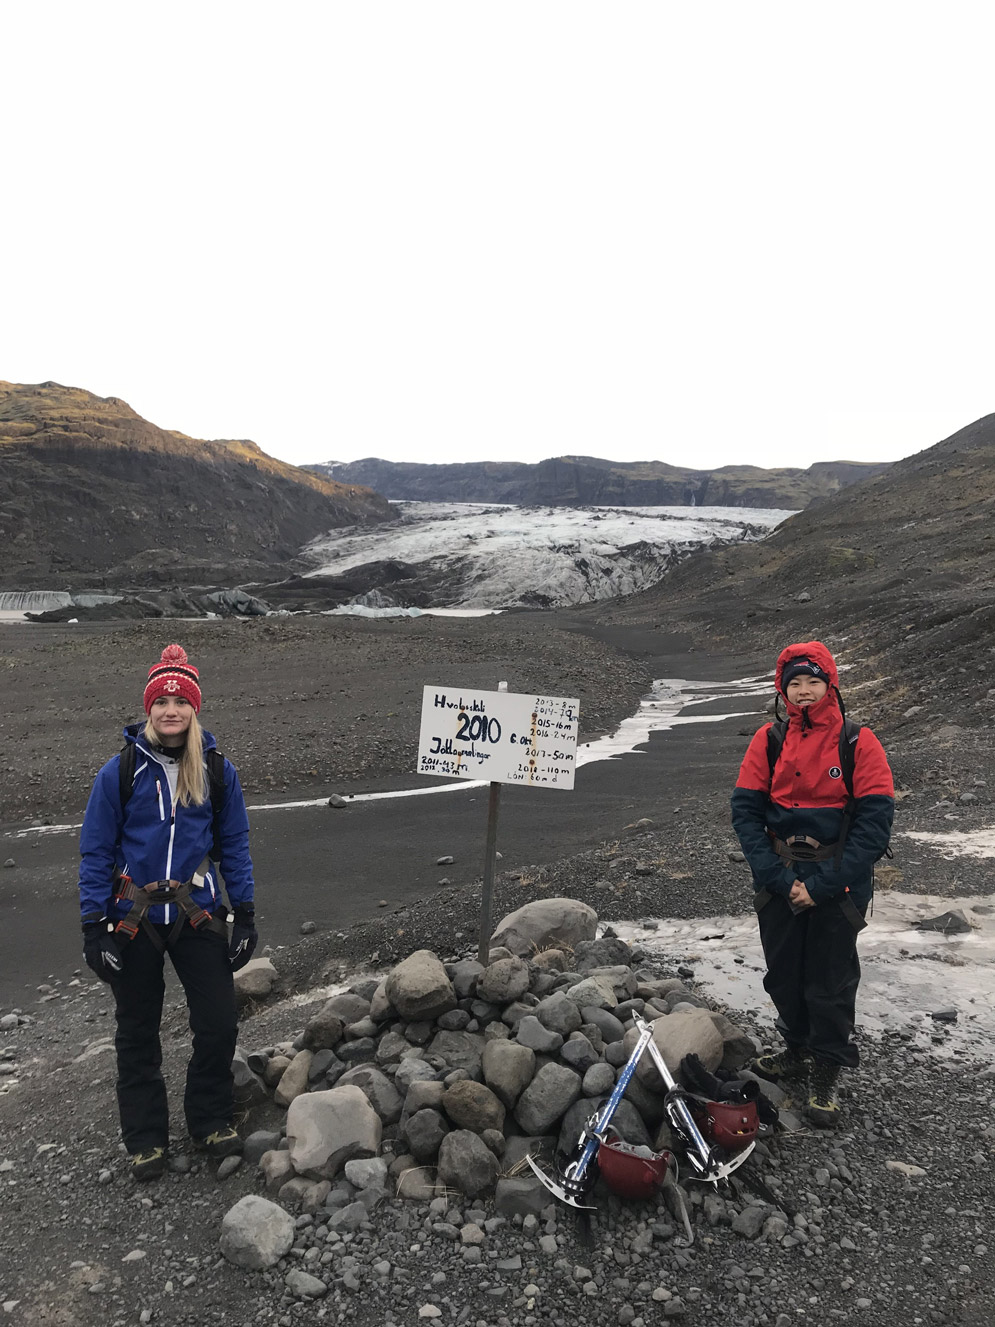 two students, wearing warm clothing and Boston hats, stand next to a pile of rocks with hiking gear and a sign that has dates and distances on it